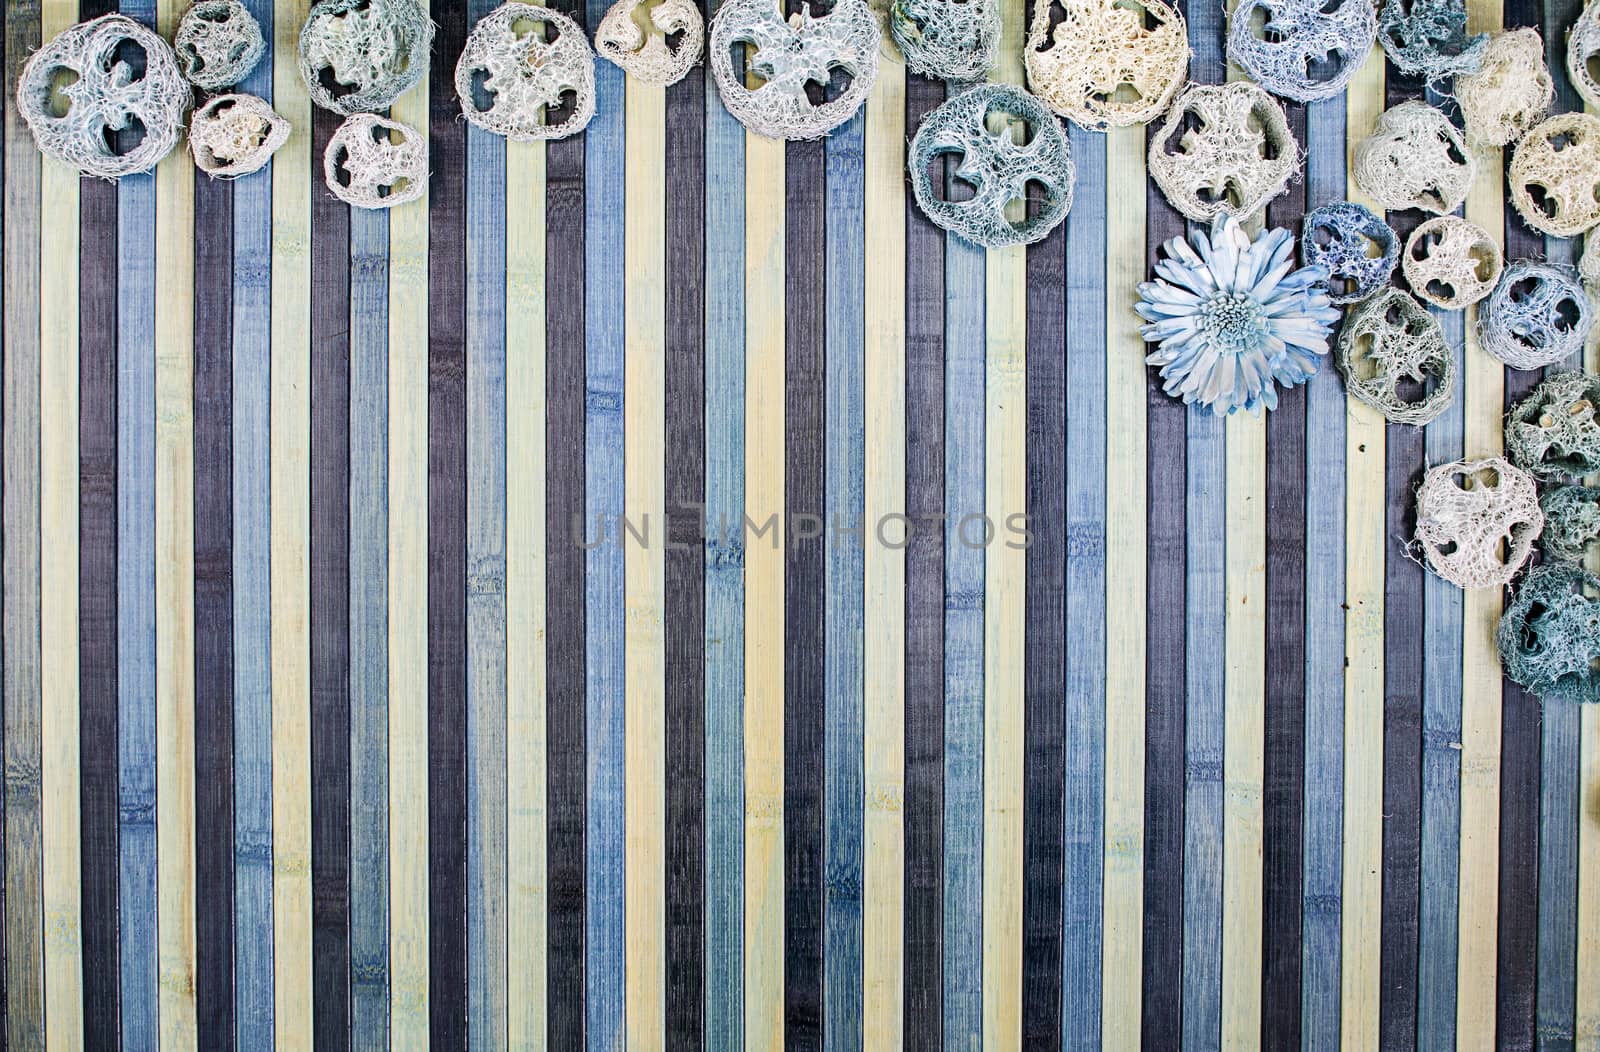 Background composition on wood in shades of light blue and blue  by robbyfontanesi